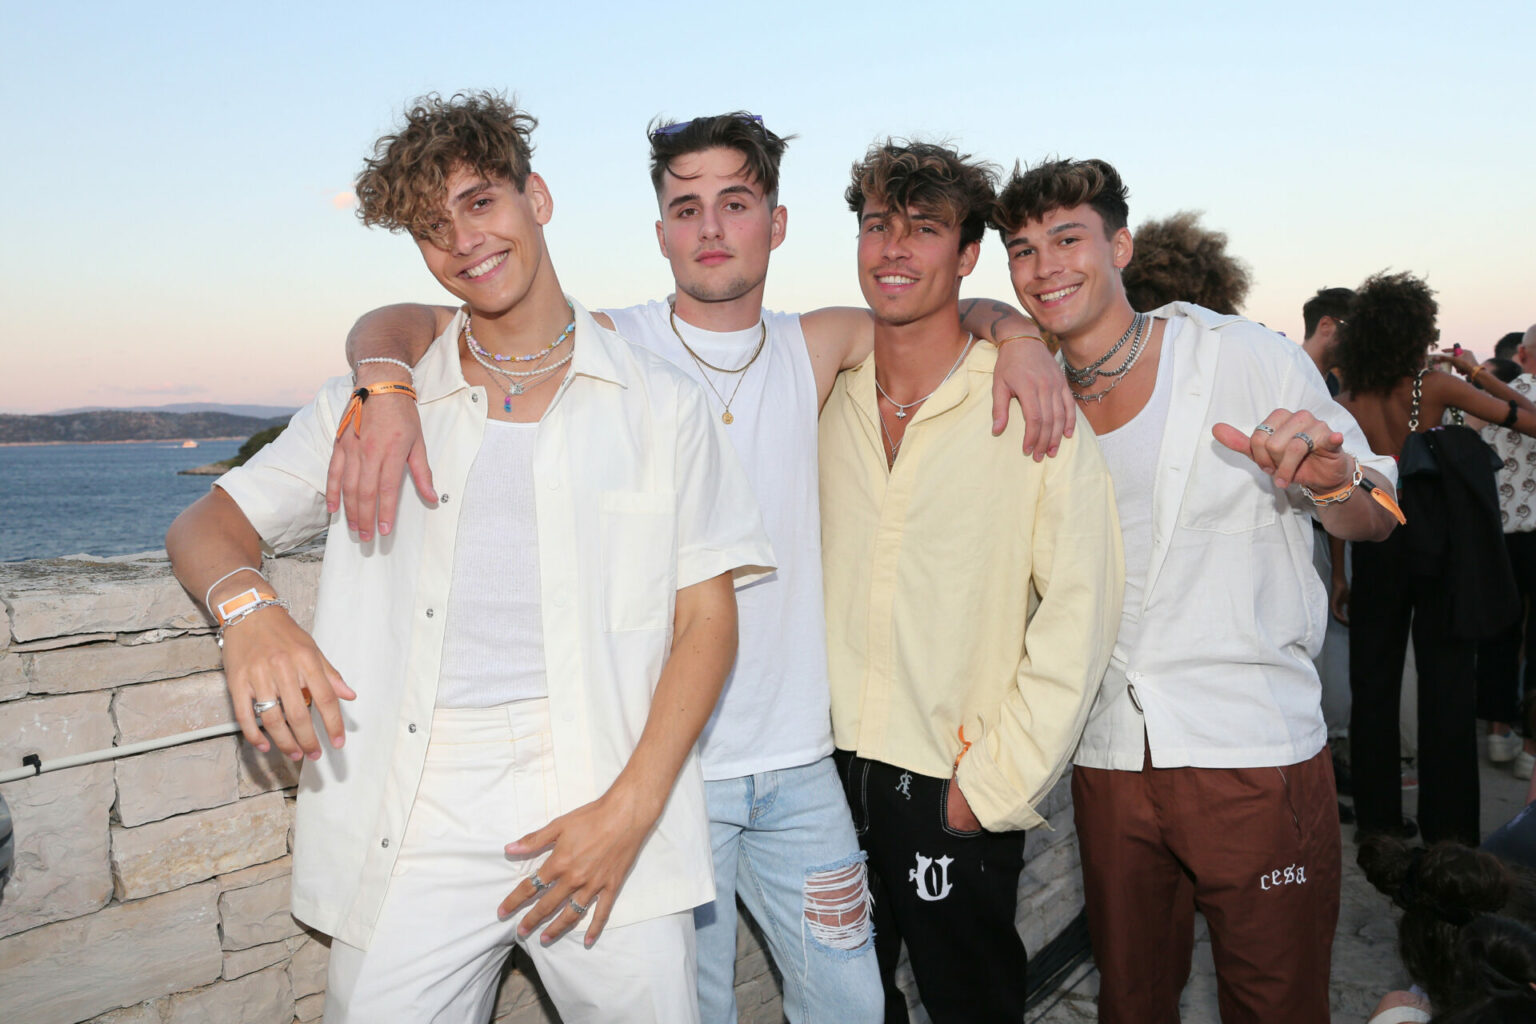 OBONJAN, CROATIA - JUNE 11:  Elevator boys Bene, Luis Freitag, Tim Schaecker, Julien Brown during the CRO x ABOUT YOU concert „Smiles Island“  on June 11, 2022 in Obonjan, Croatia. (Photo by G.Schober/Getty Images/PR for ABOUT YOU)